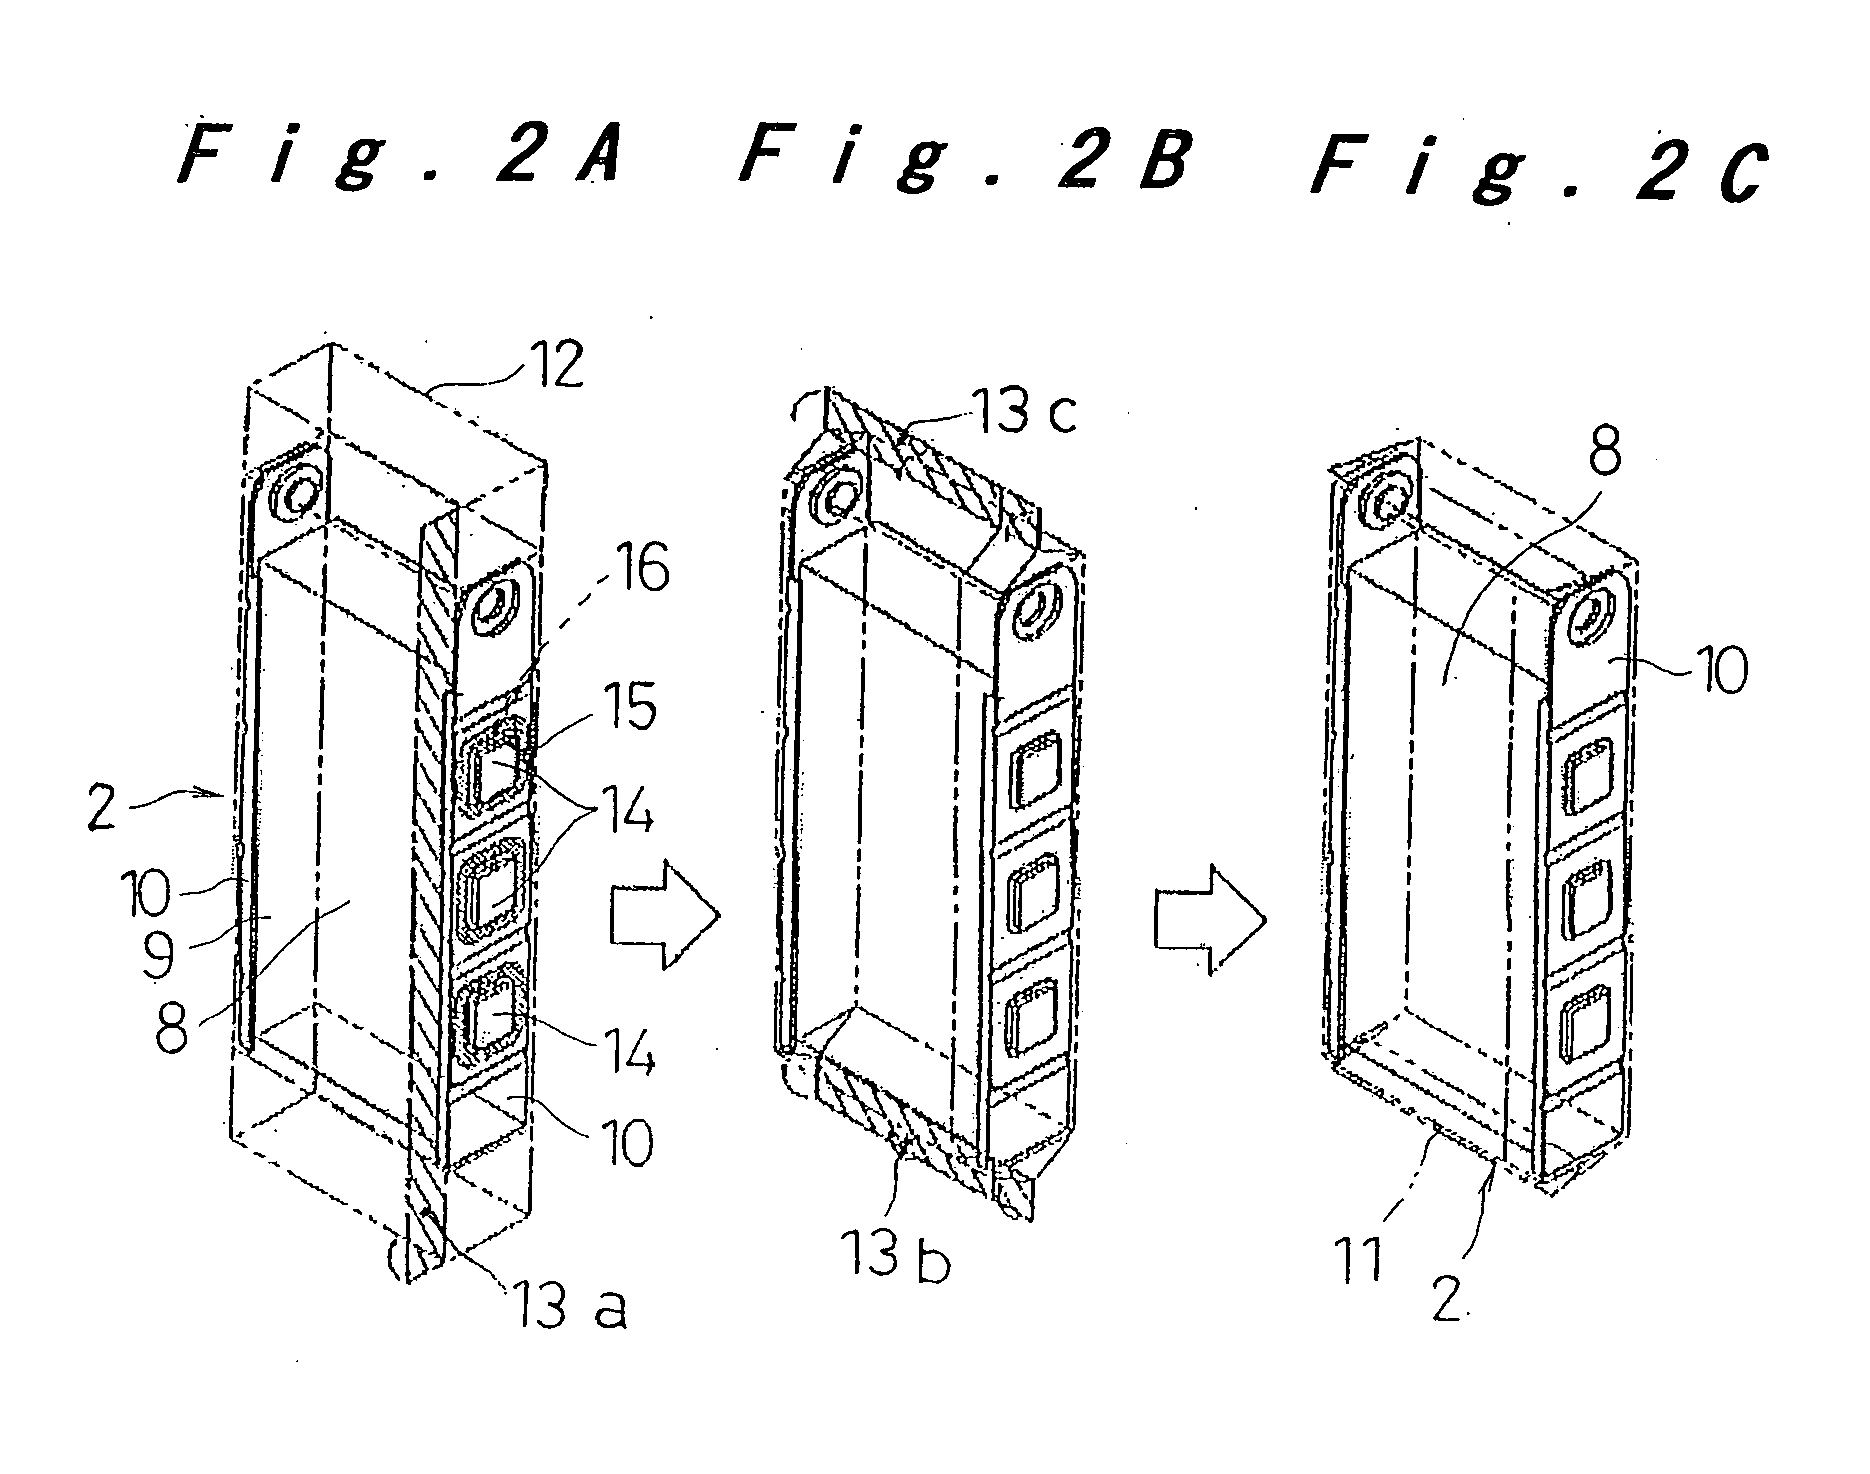 Cell, connected-cell body, and battery module using the same